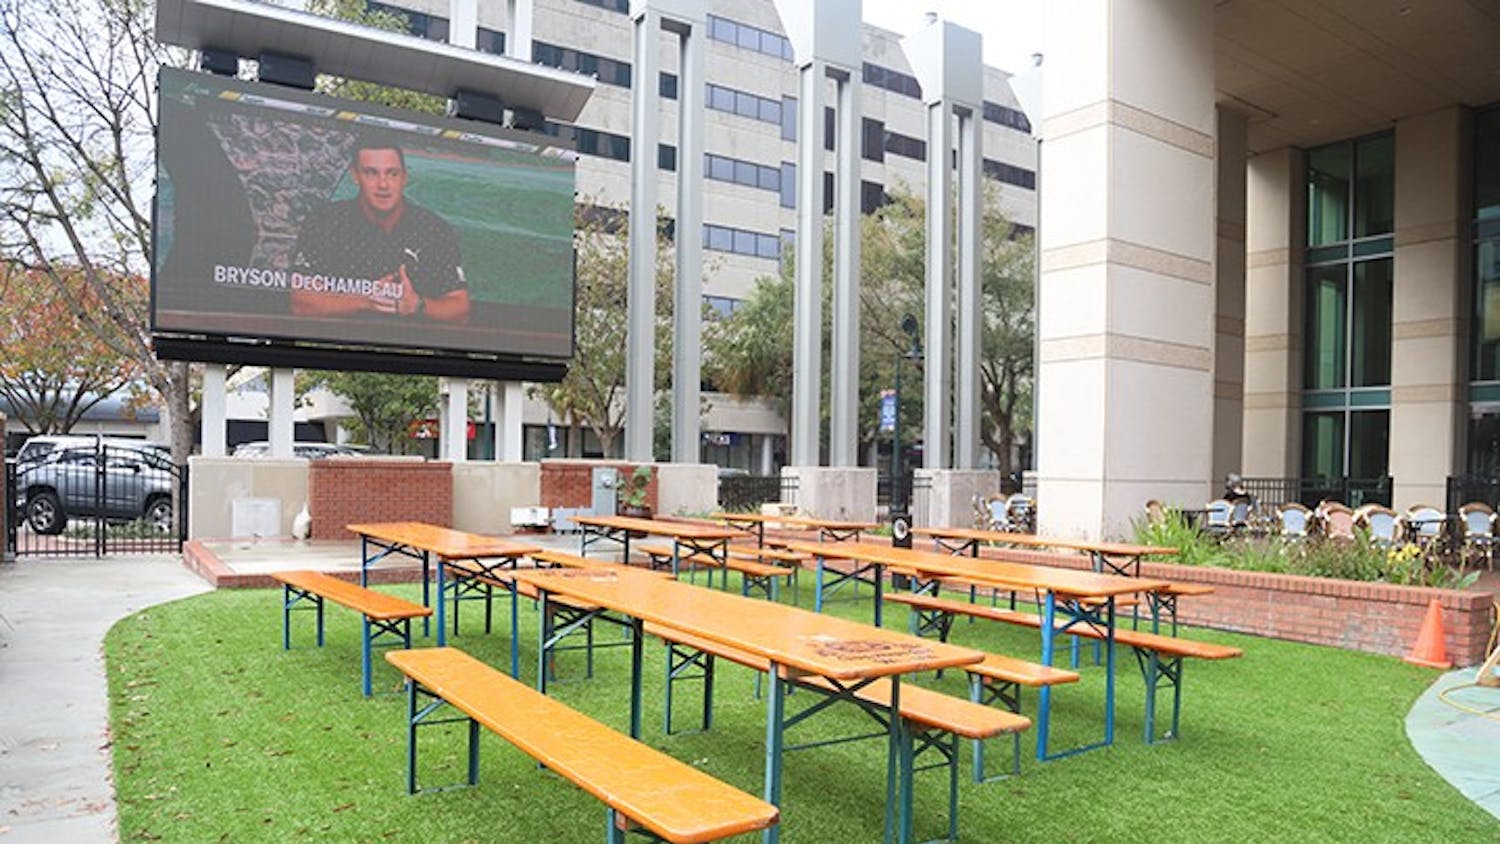 Market on Main offers many different options for outdoor seating. These options include high tables, picnic tables and an outdoor bar. The outdoor seating also includes a large screen that provides entertainment for outdoor guests.